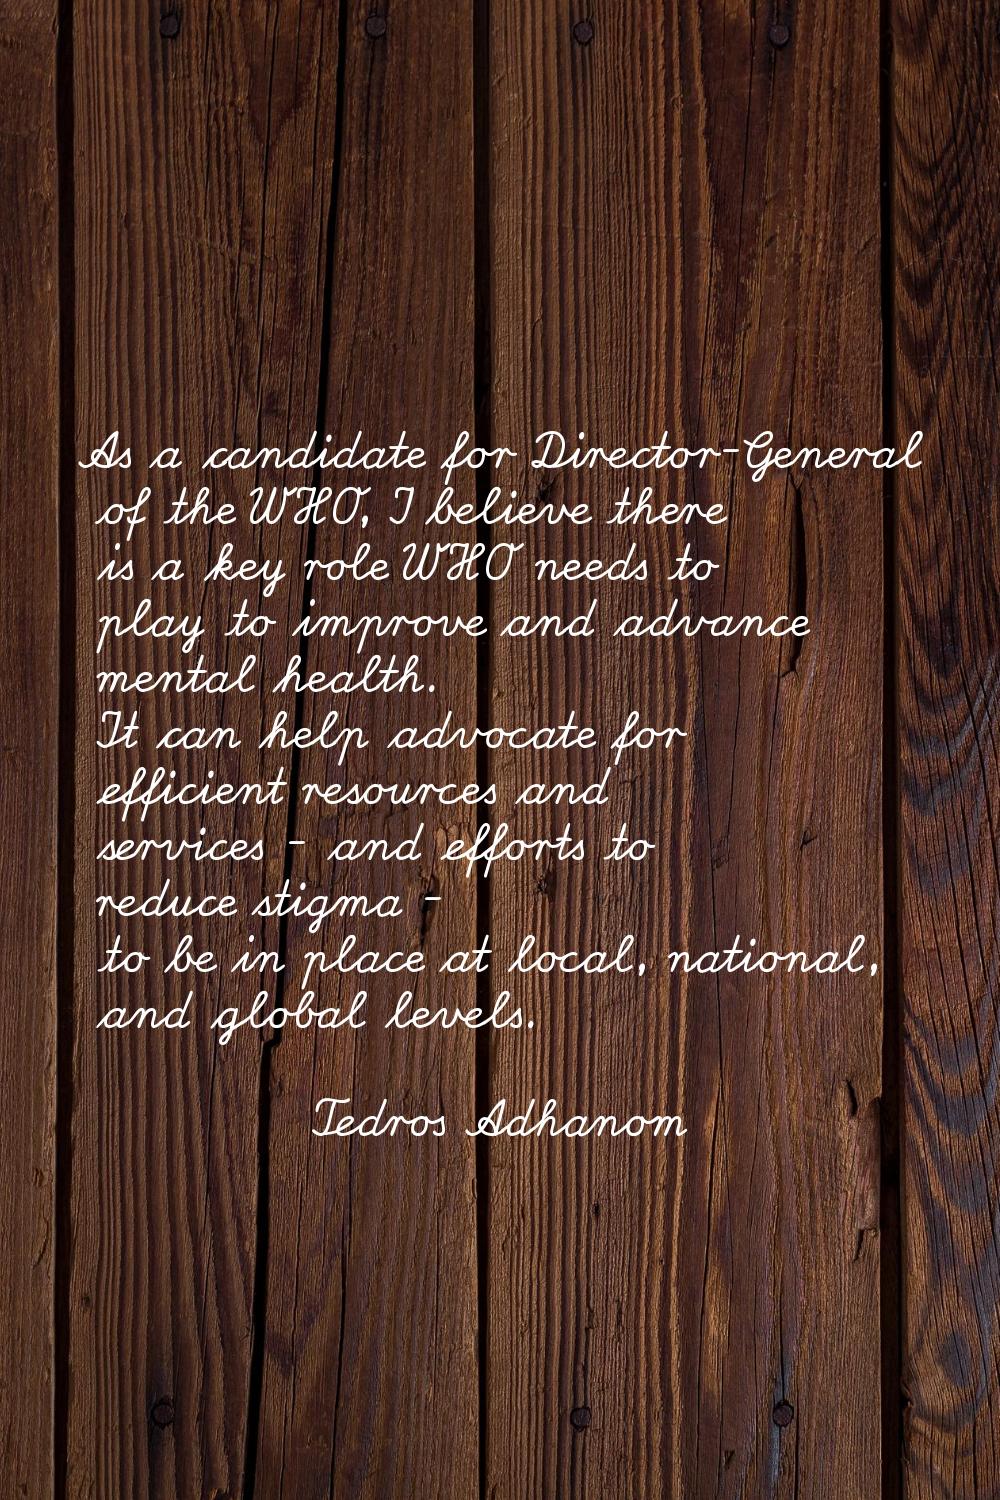 As a candidate for Director-General of the WHO, I believe there is a key role WHO needs to play to 